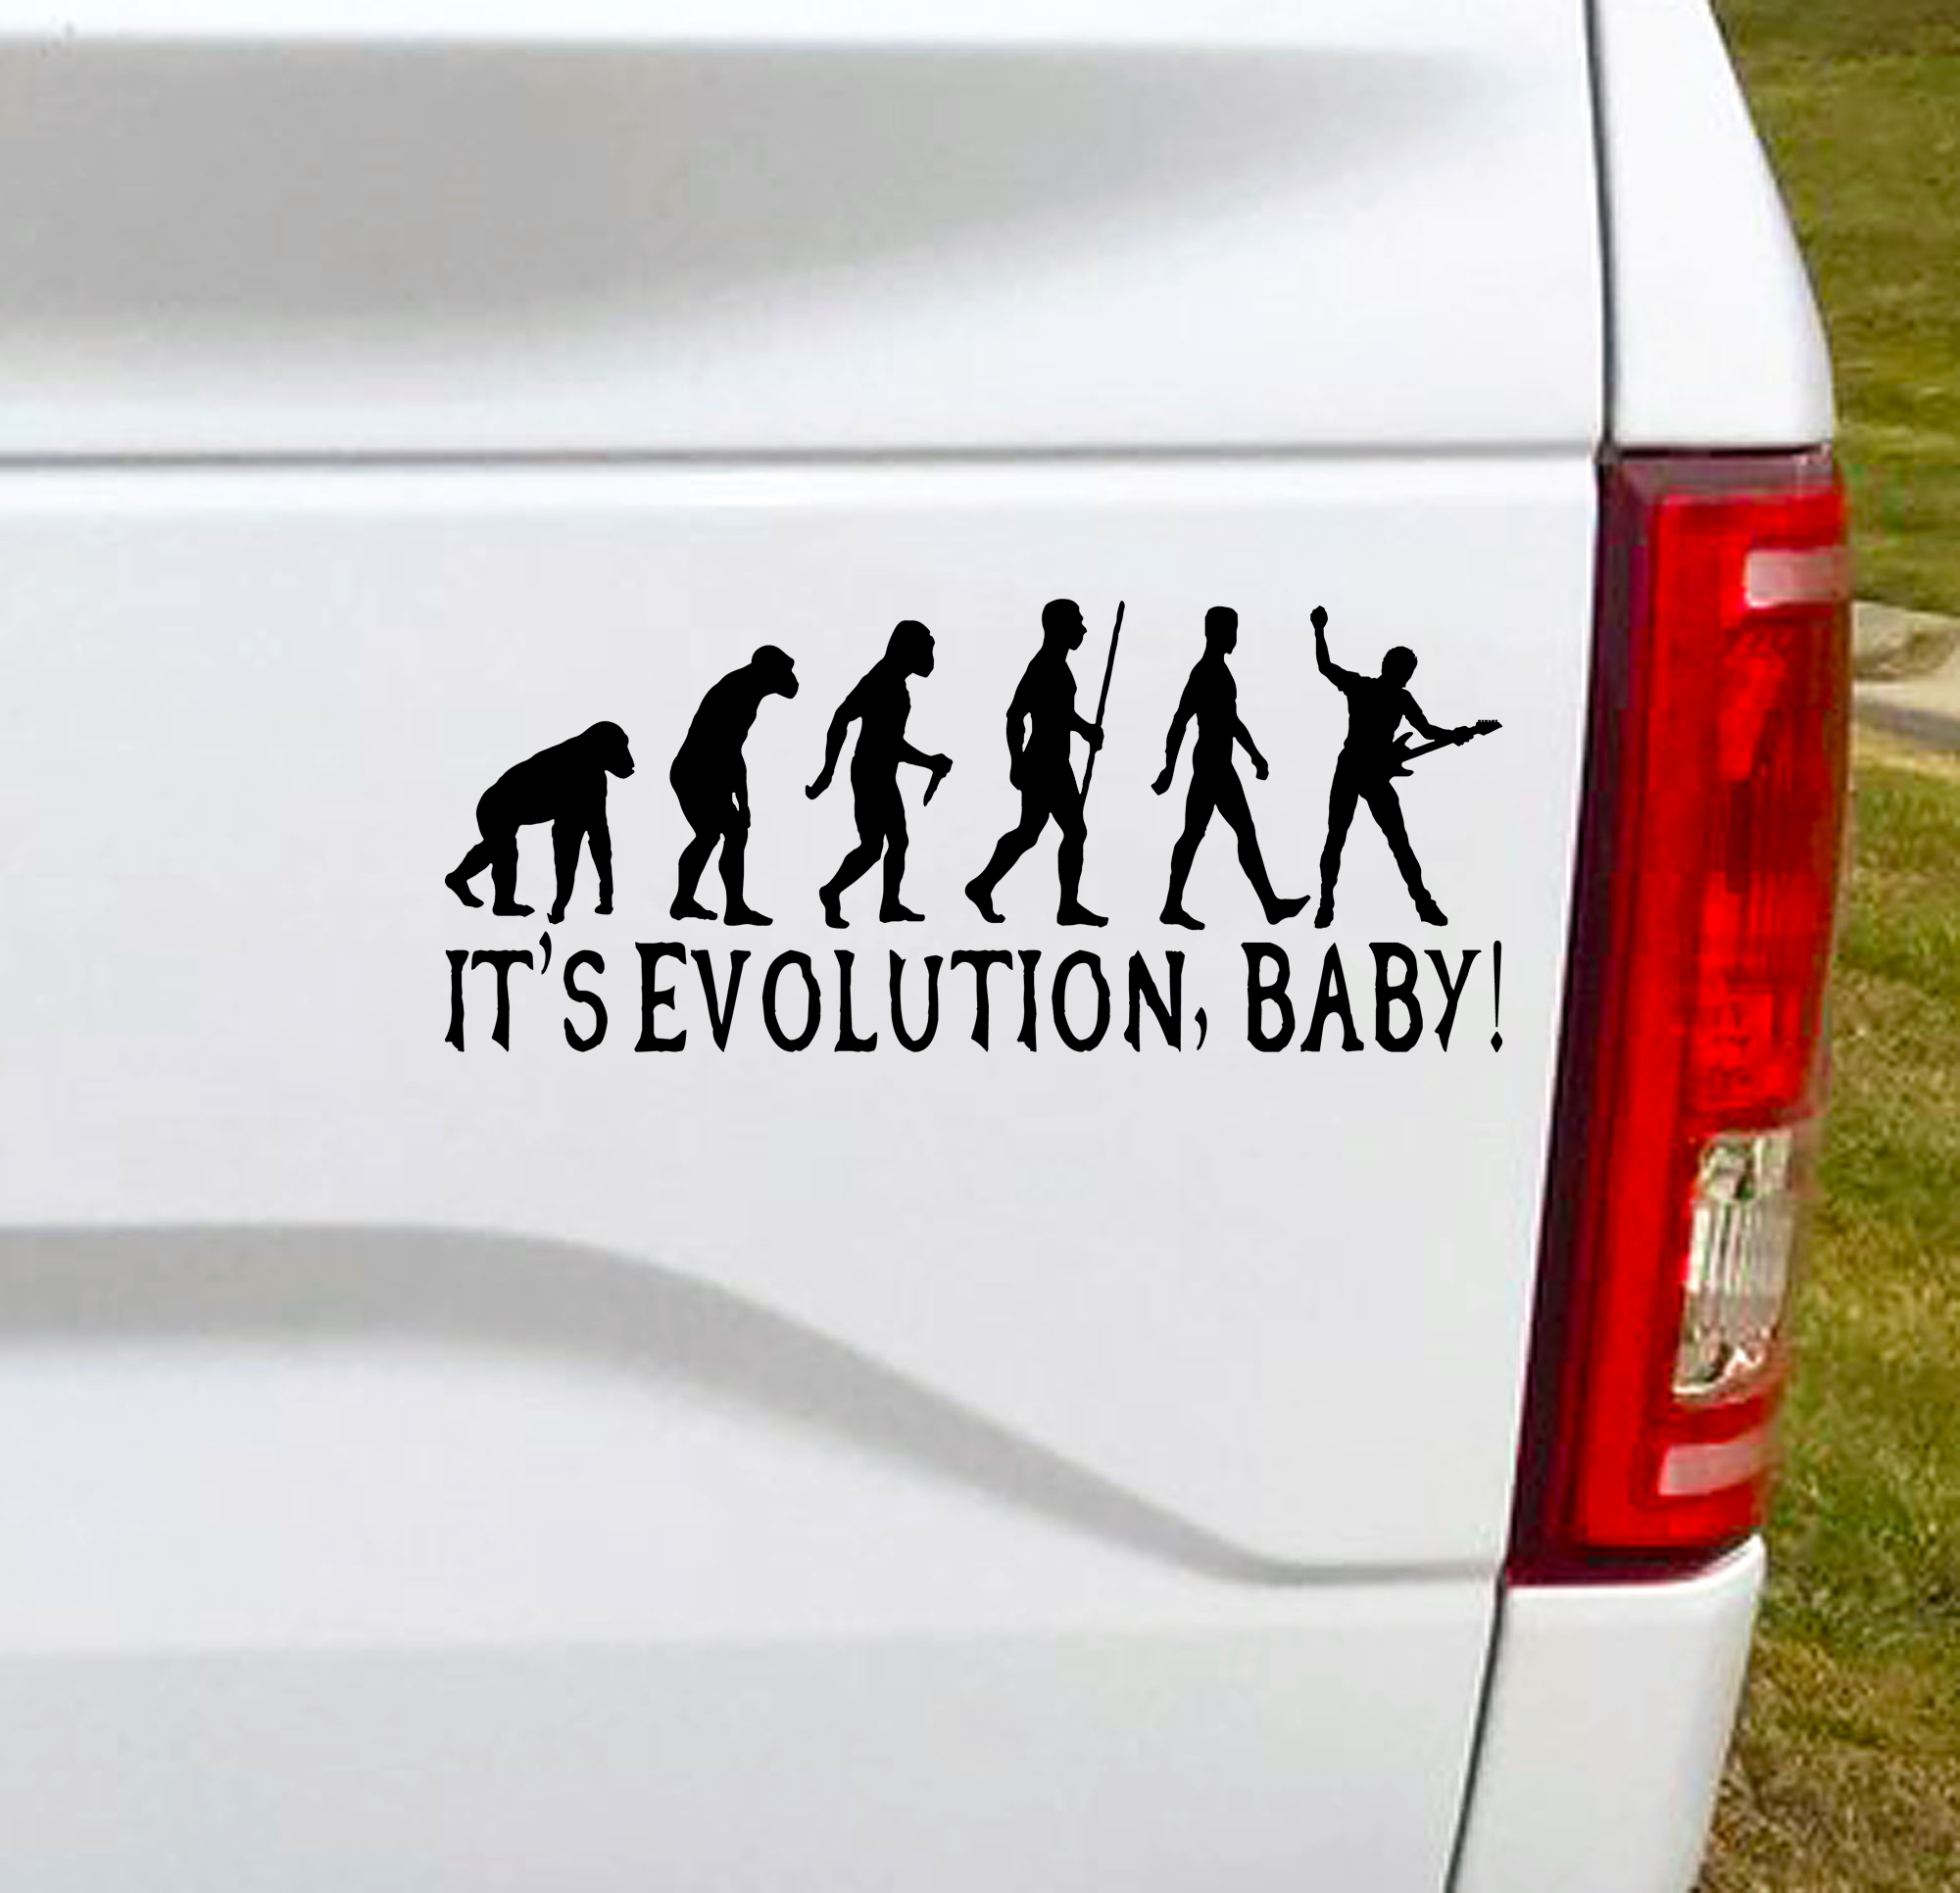 It's Evolution, Baby funny vinyl car decal. Only Pearl Jam fans will get this reference. 7"W x 2.5"H Funny Car Decal, Car Sticker, Car Vinyl, Bumper Sticker, Vinyl Stickers, Vinyl Sticker.